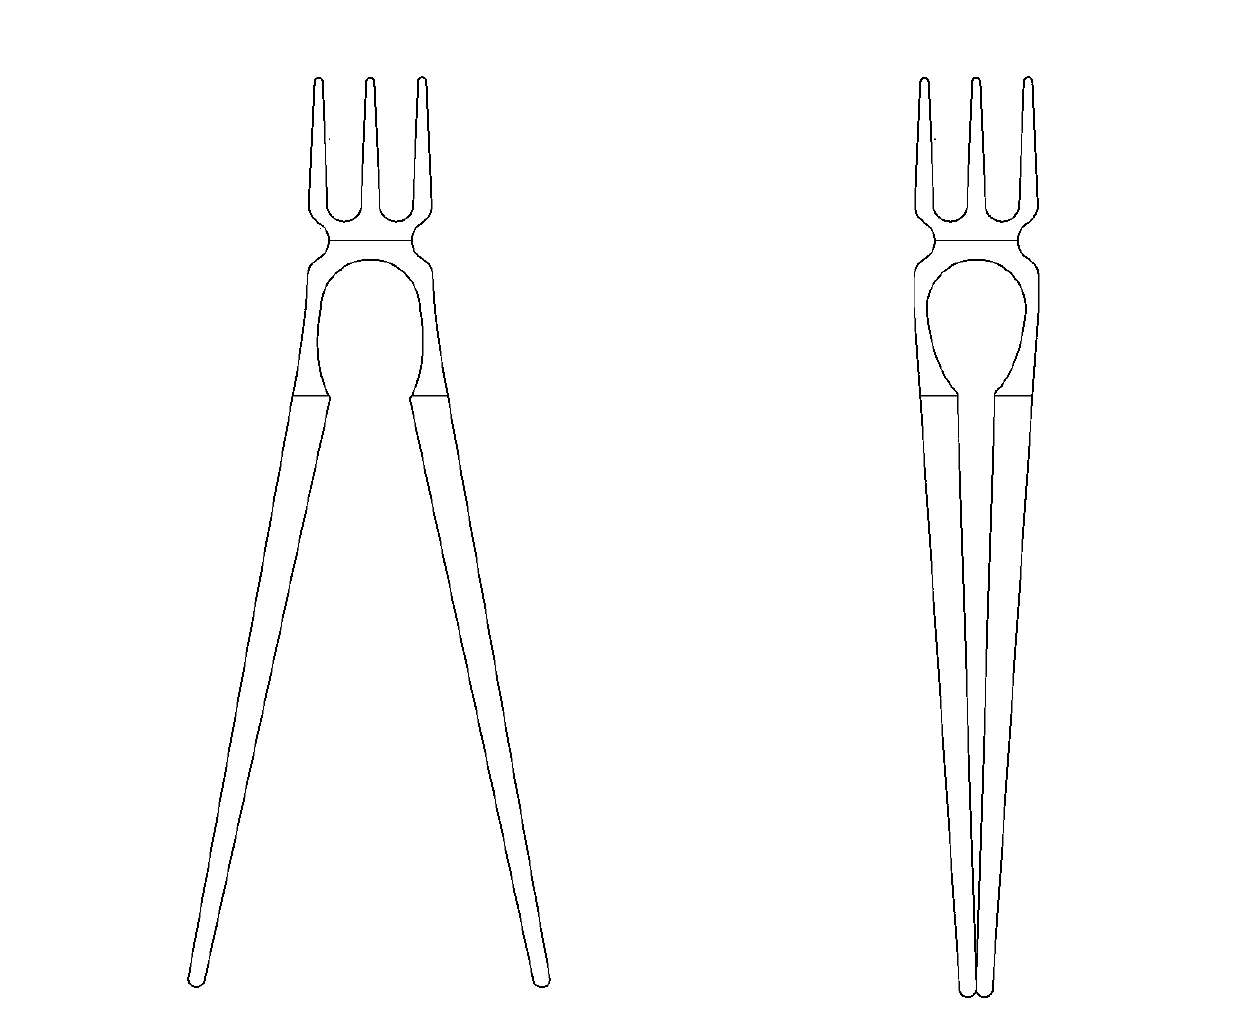 Chopsticks with fork, chopsticks with spoon and chopsticks with fork and spoon